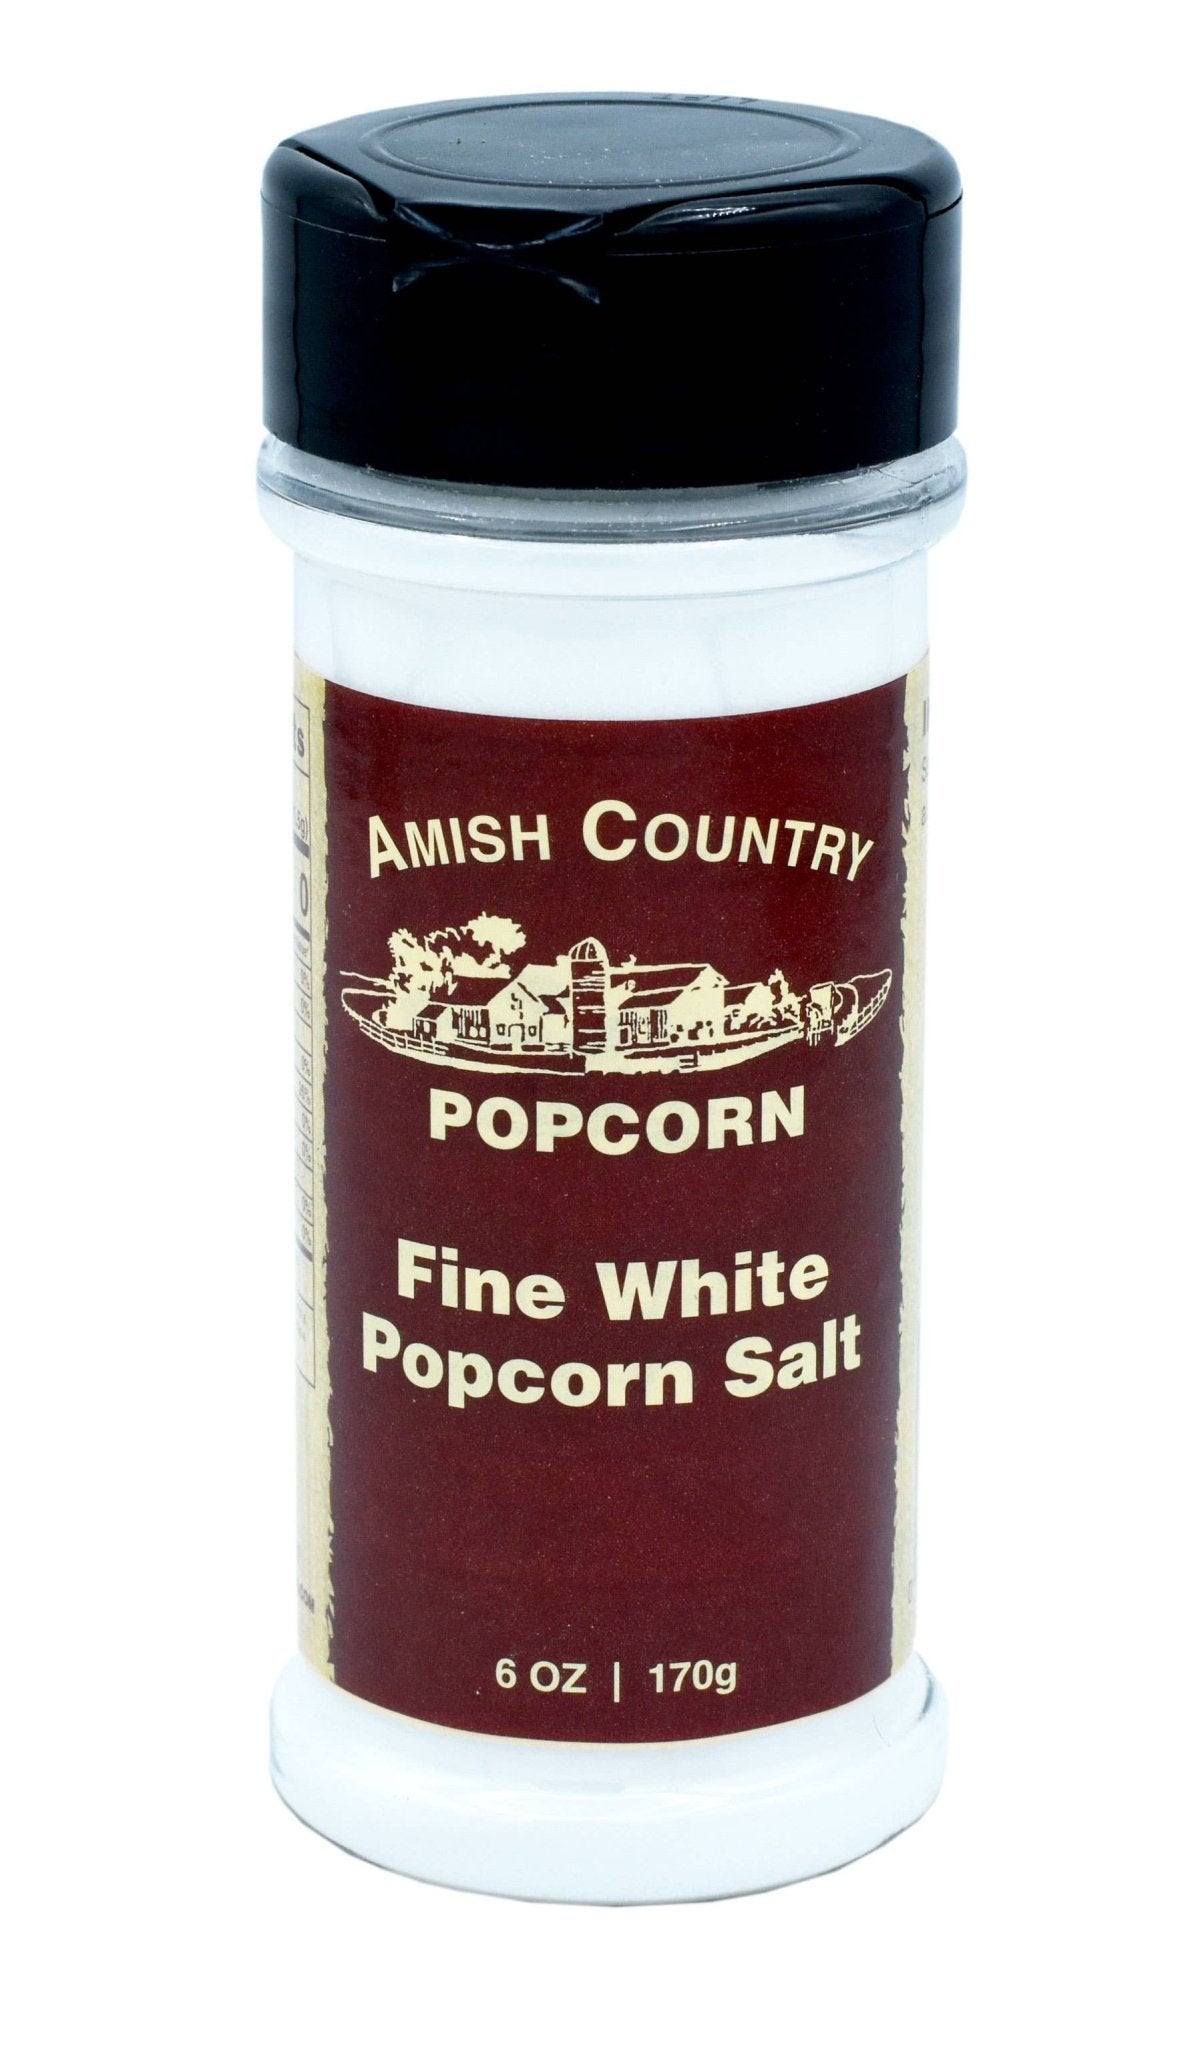 Amish Country Popcorn - 6oz Bottle of Fine White Popcorn Salt - Pacific Flyway Supplies